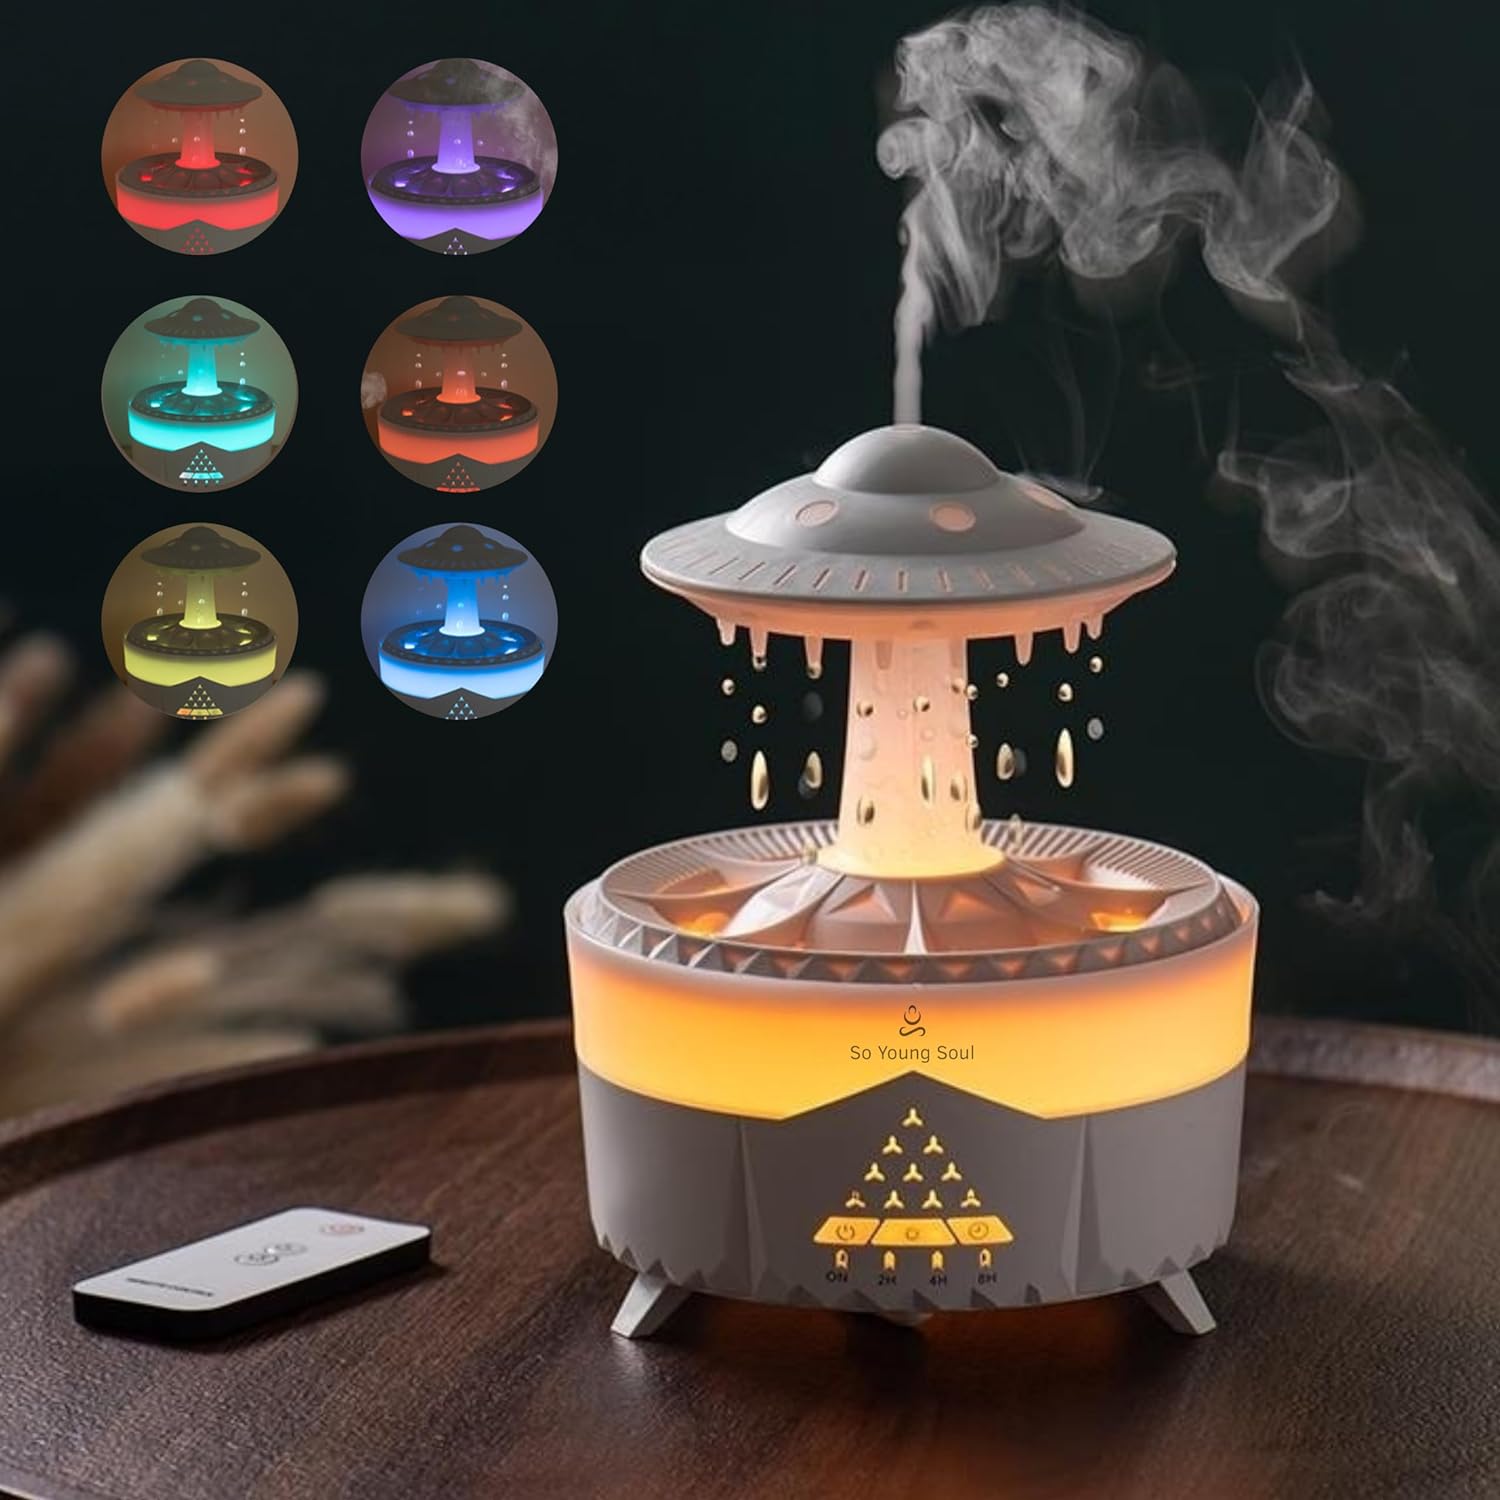 Cloud Rain Humidifiers Essential Oil Diffuser with 7 Colors nightlights Aromatherapy Diffuser Desk Fountain for Relaxing Mood Waterdrop Sound Rain Drop Diffuser Rain Sound Lamp 350 ml